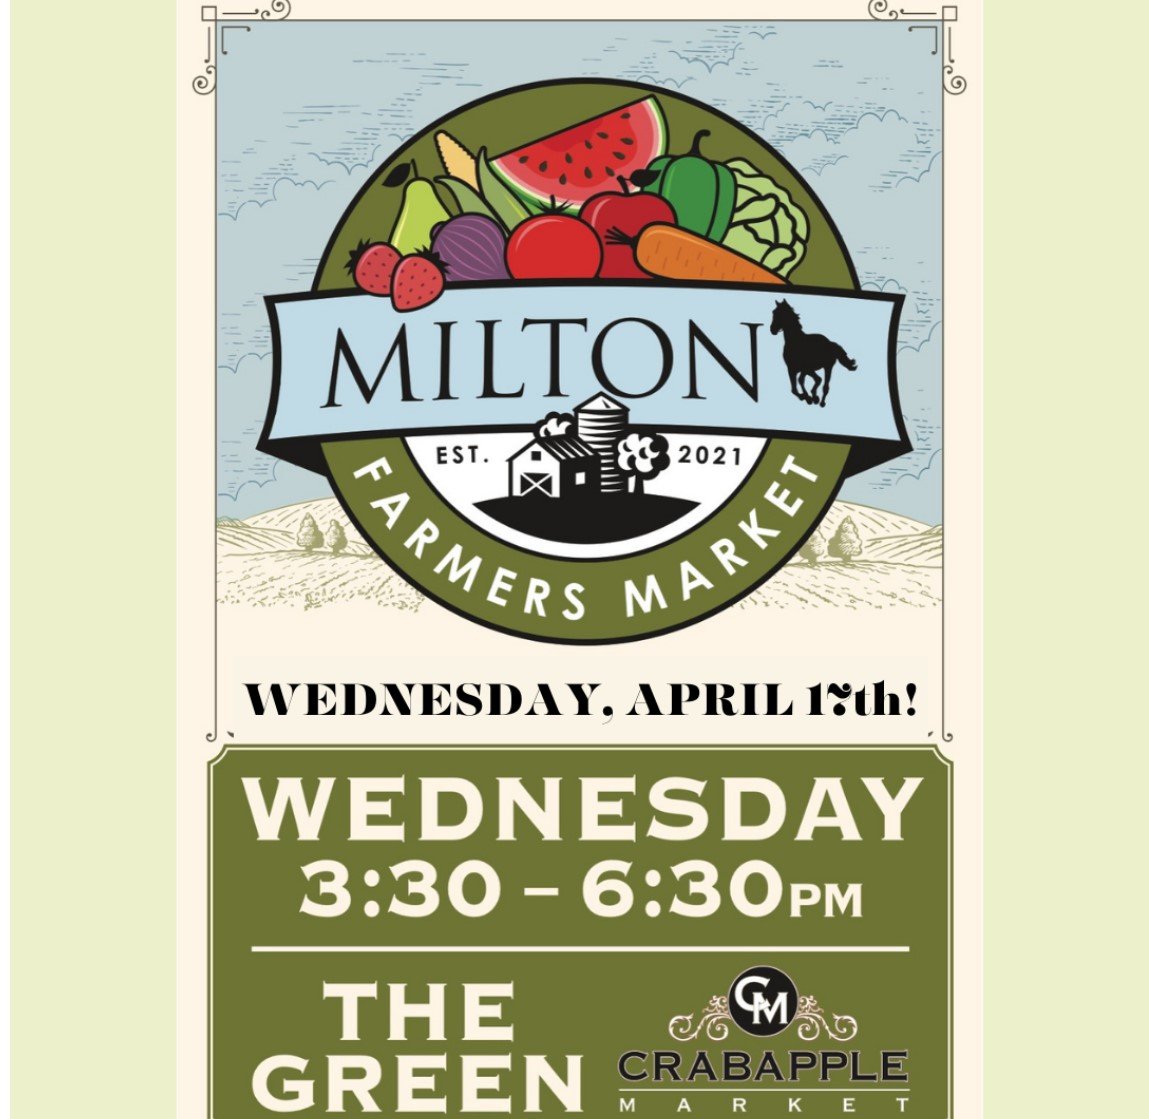 We are very excited to announce the Milton Farmers Market is moving to Wednesday afternoon, 3:30 - 6:30pm on #TheGreen! Wednesday, April 17th will be the first market and the vendor lineup is impressive so make plans to stop by and explore.  This wee